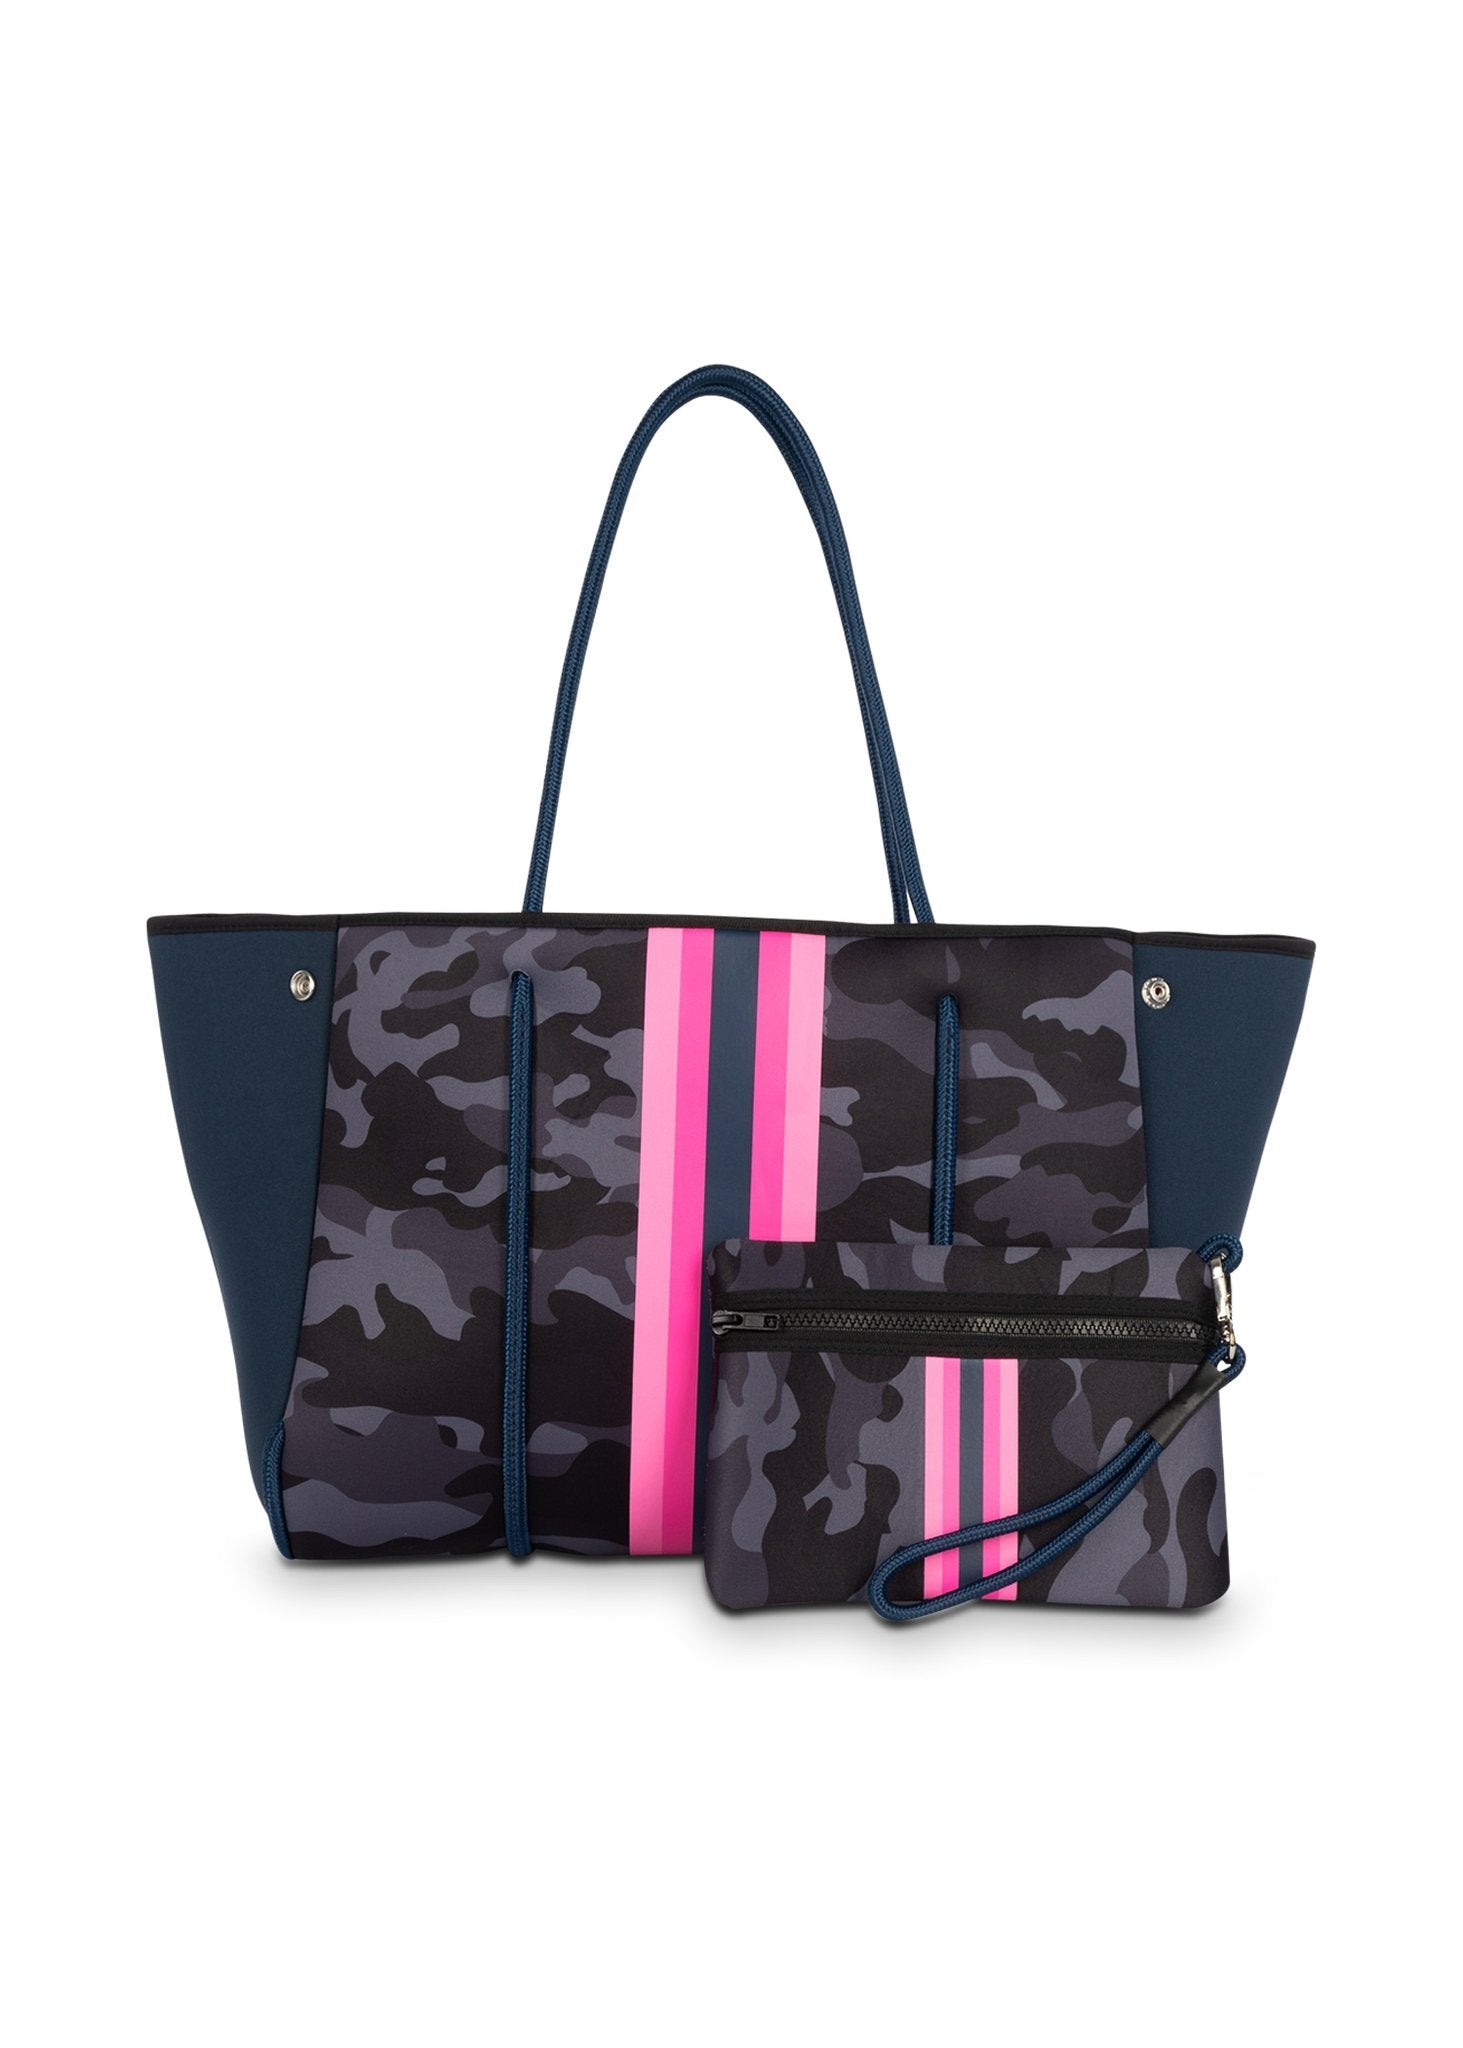 Neoprene Tote Large Blue Camo With Hot Pink Racer Stripe -  UK